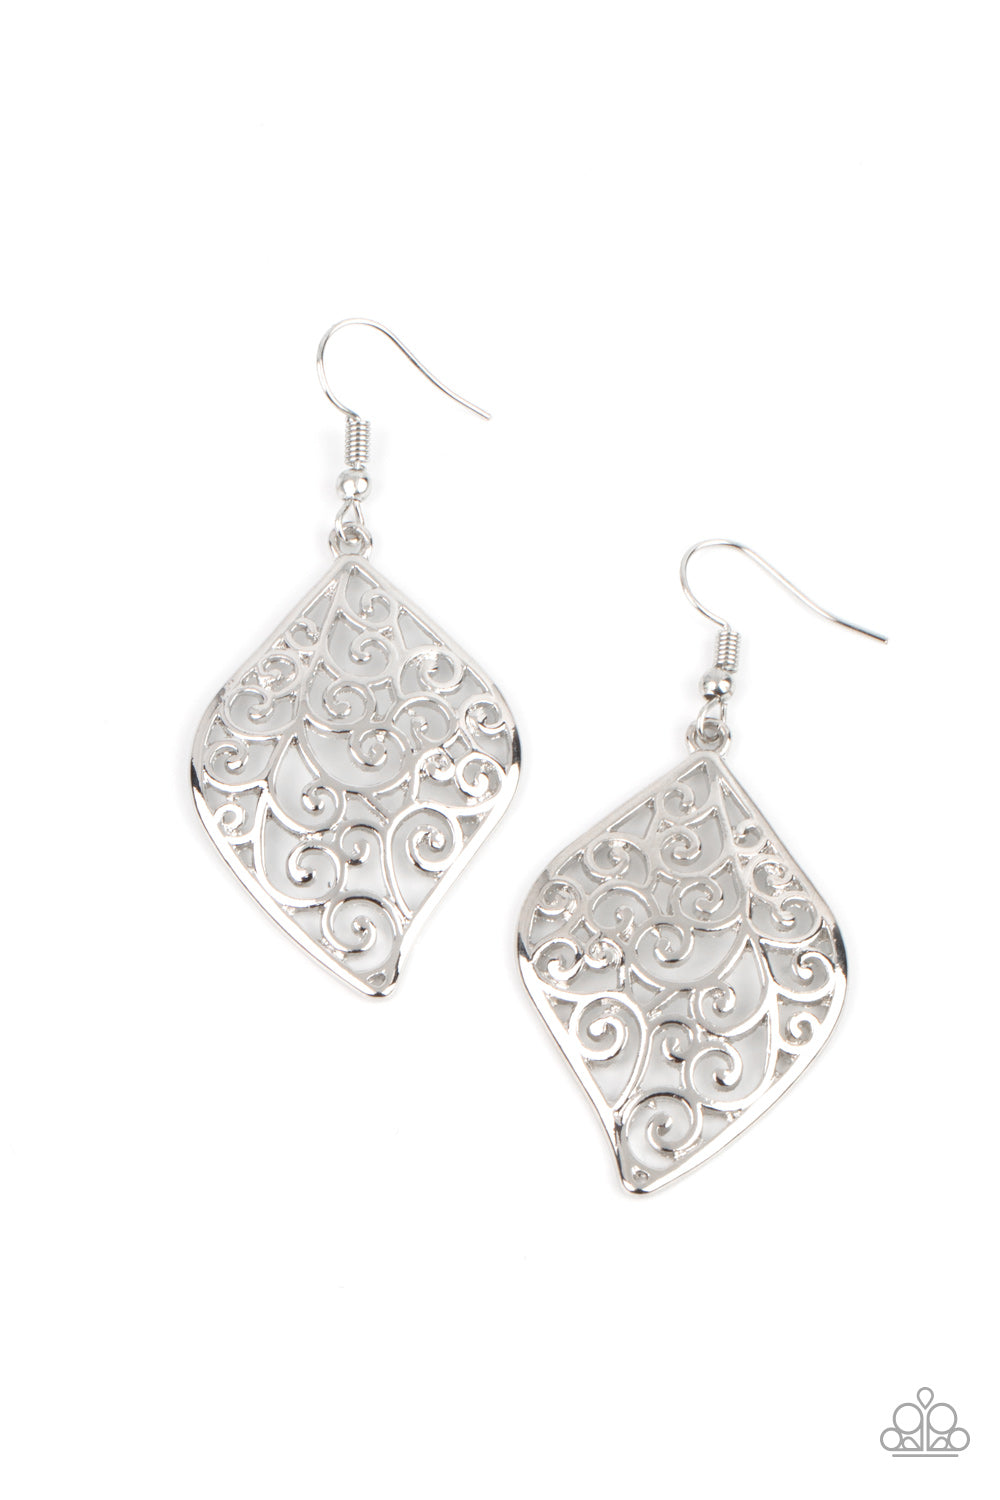 Your Vine Or Mine - Silver Earrings - Paparazzi Accessories - Silver floral filigree vines permeate a refreshing leaf-shaped frame, creating a romantically idyllic lure. Earring attaches to a standard fishhook fitting. Sold as one pair of earrings.